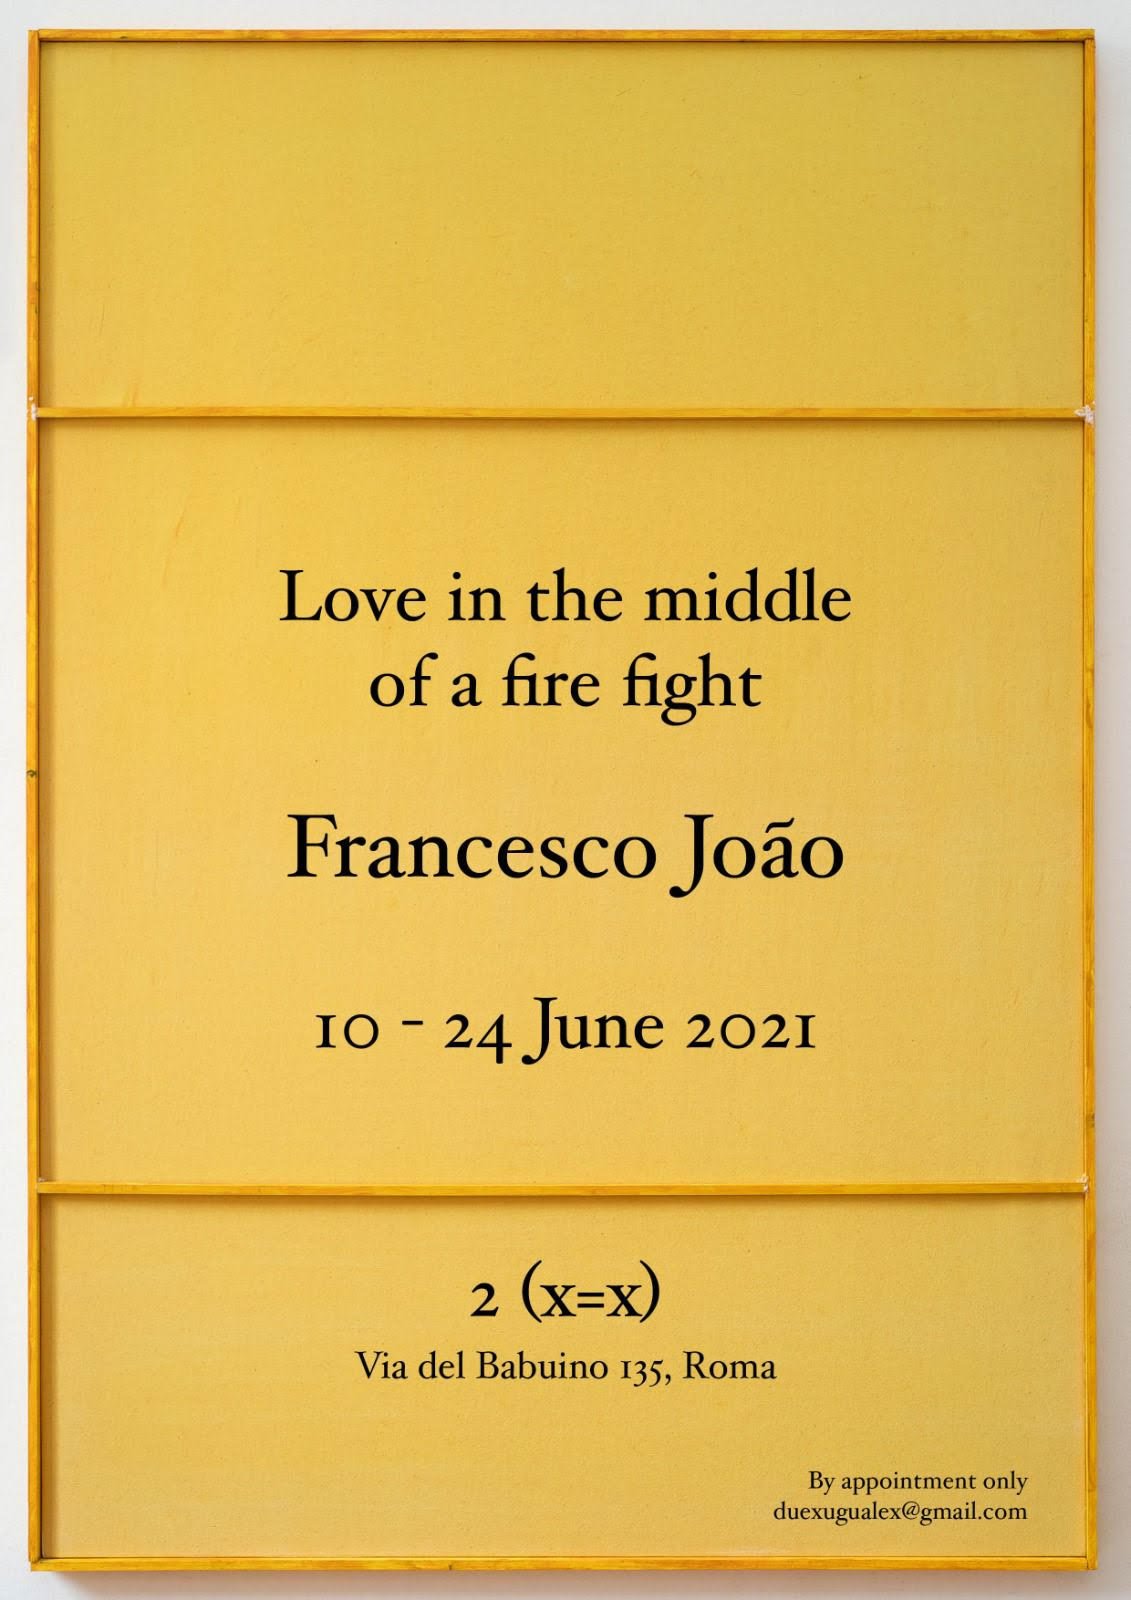 Francesco João - Love in the middle of a fire fight